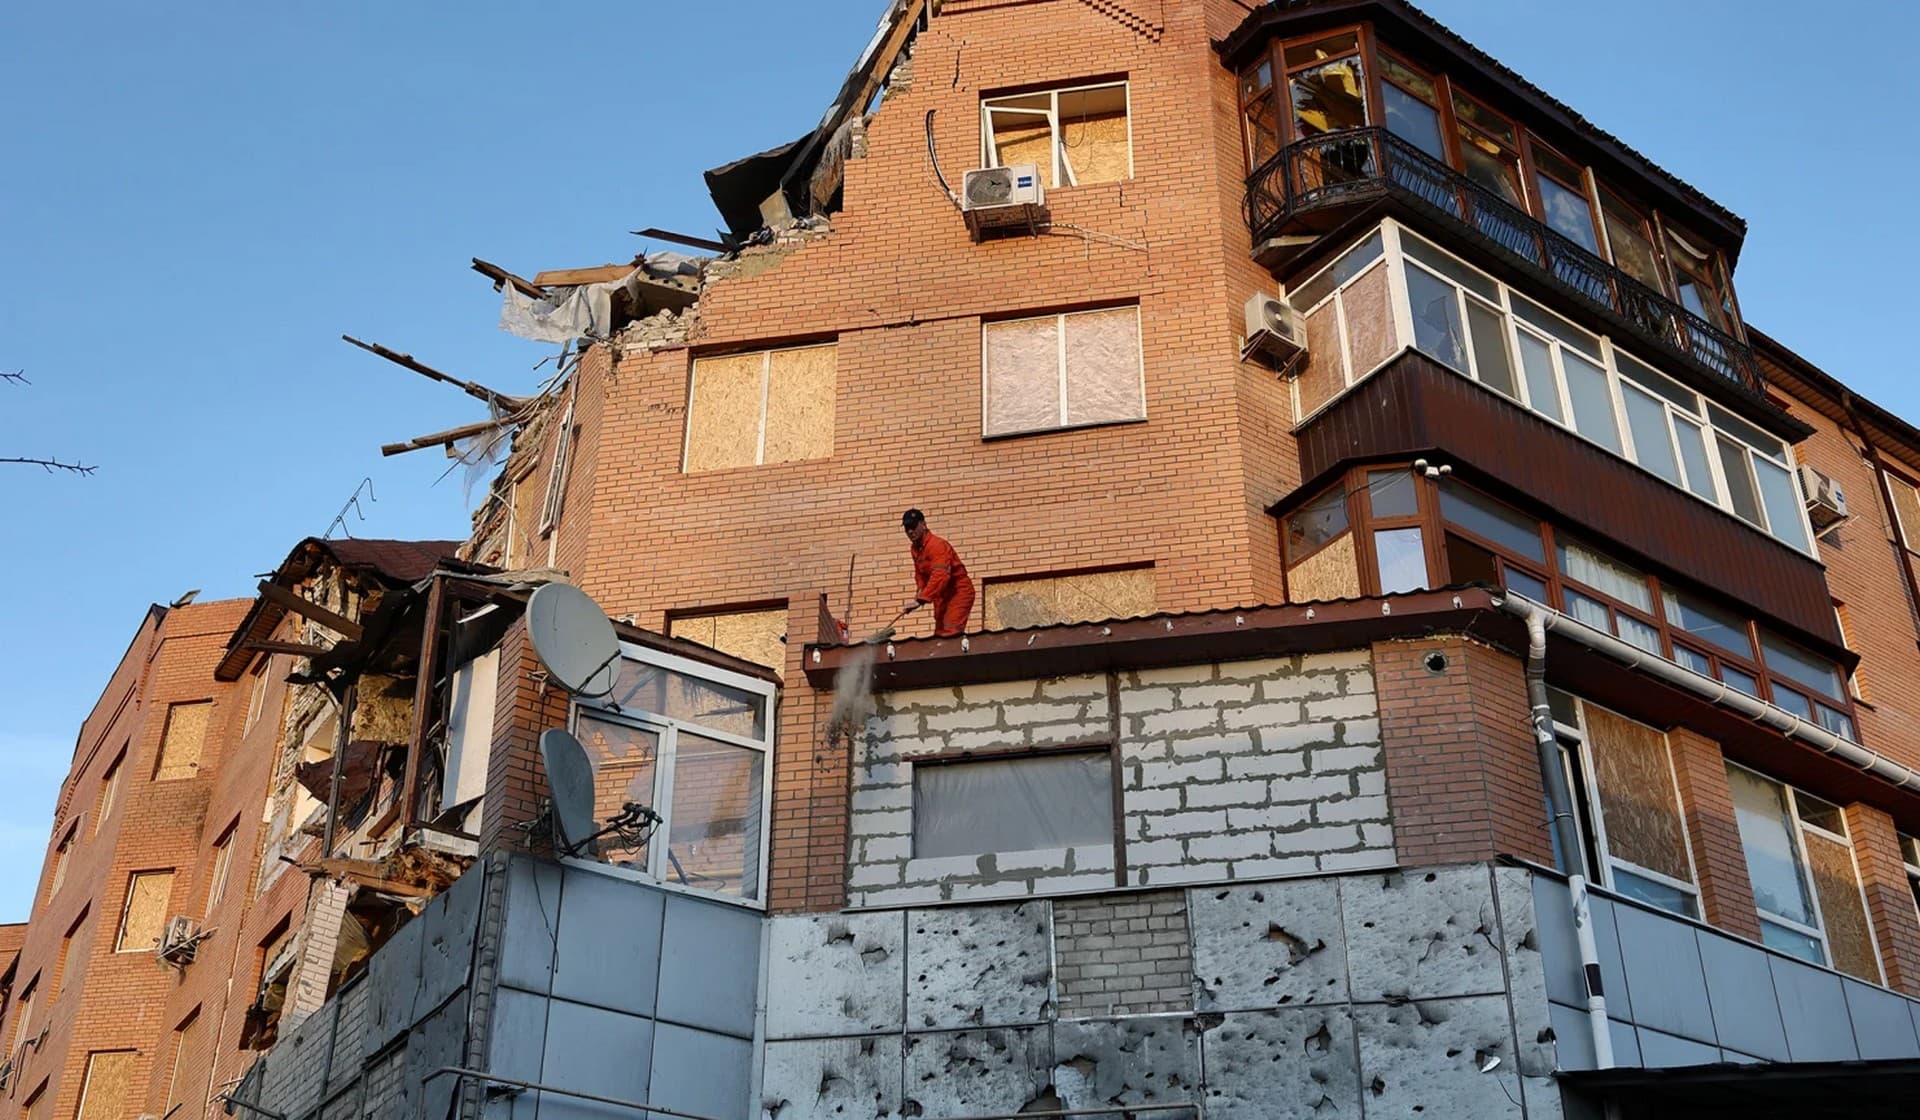 A man cleans rubble at a damaged residential building in Mykolaiv